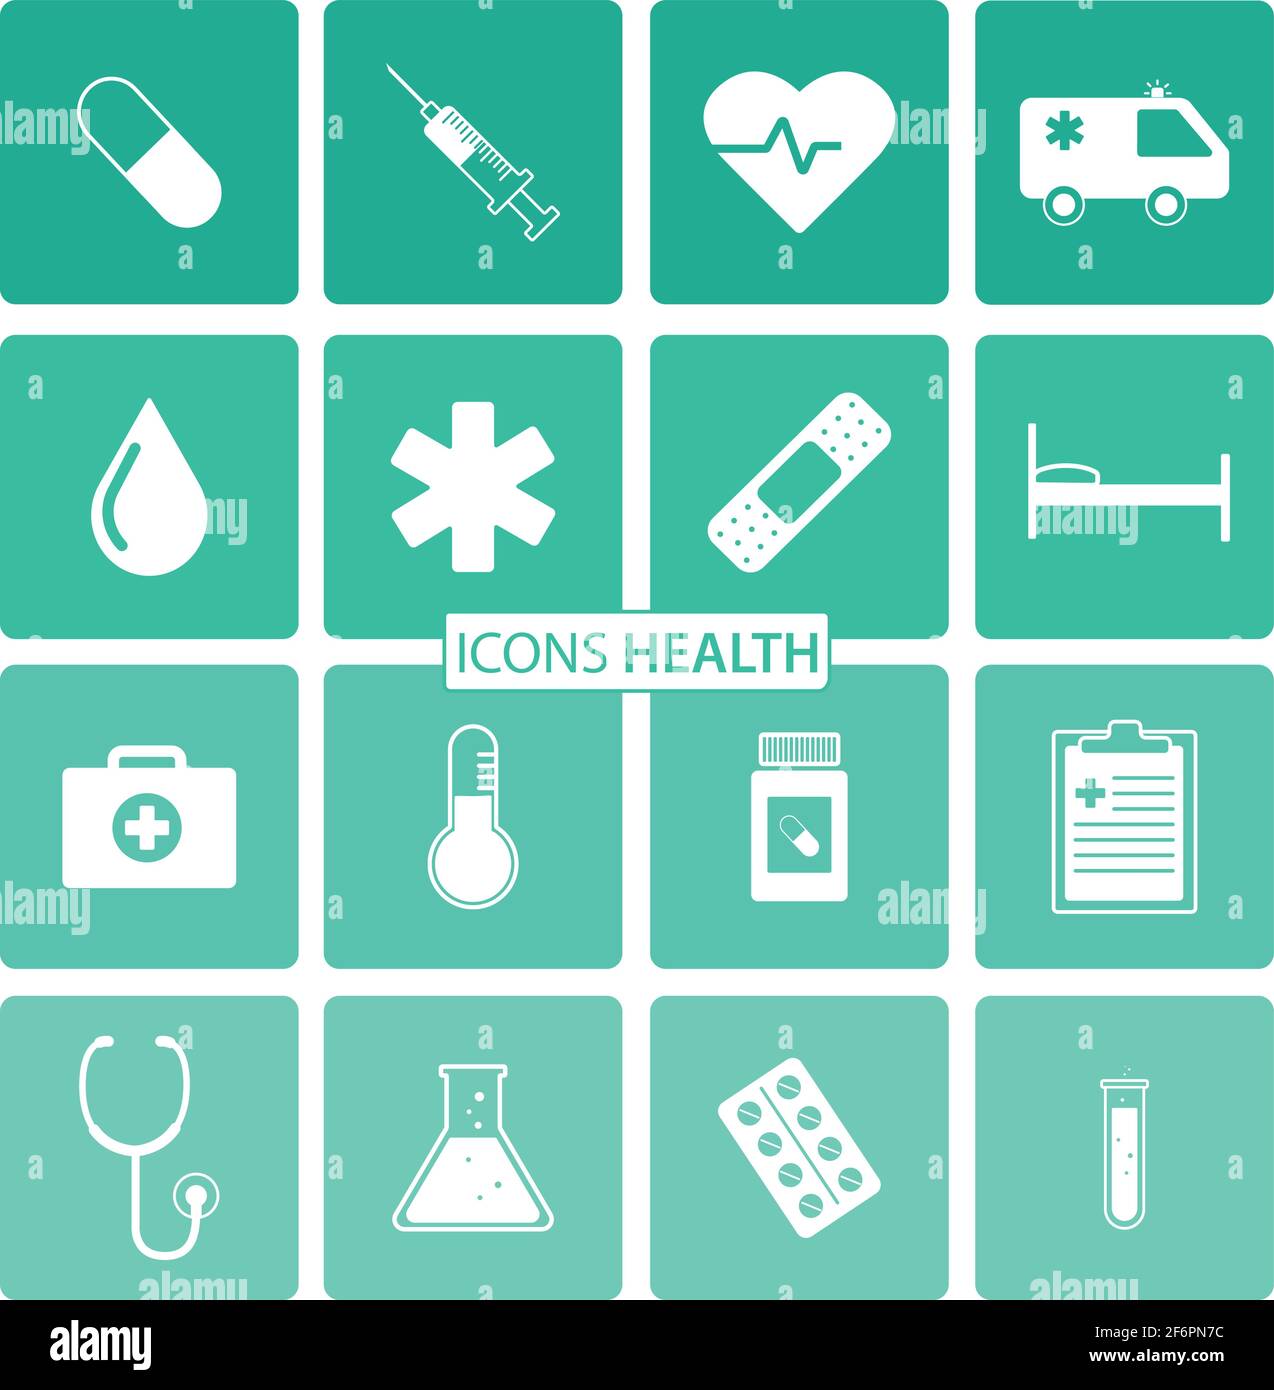 Modern icons health, background green and flat style, long shadow Stock Vector